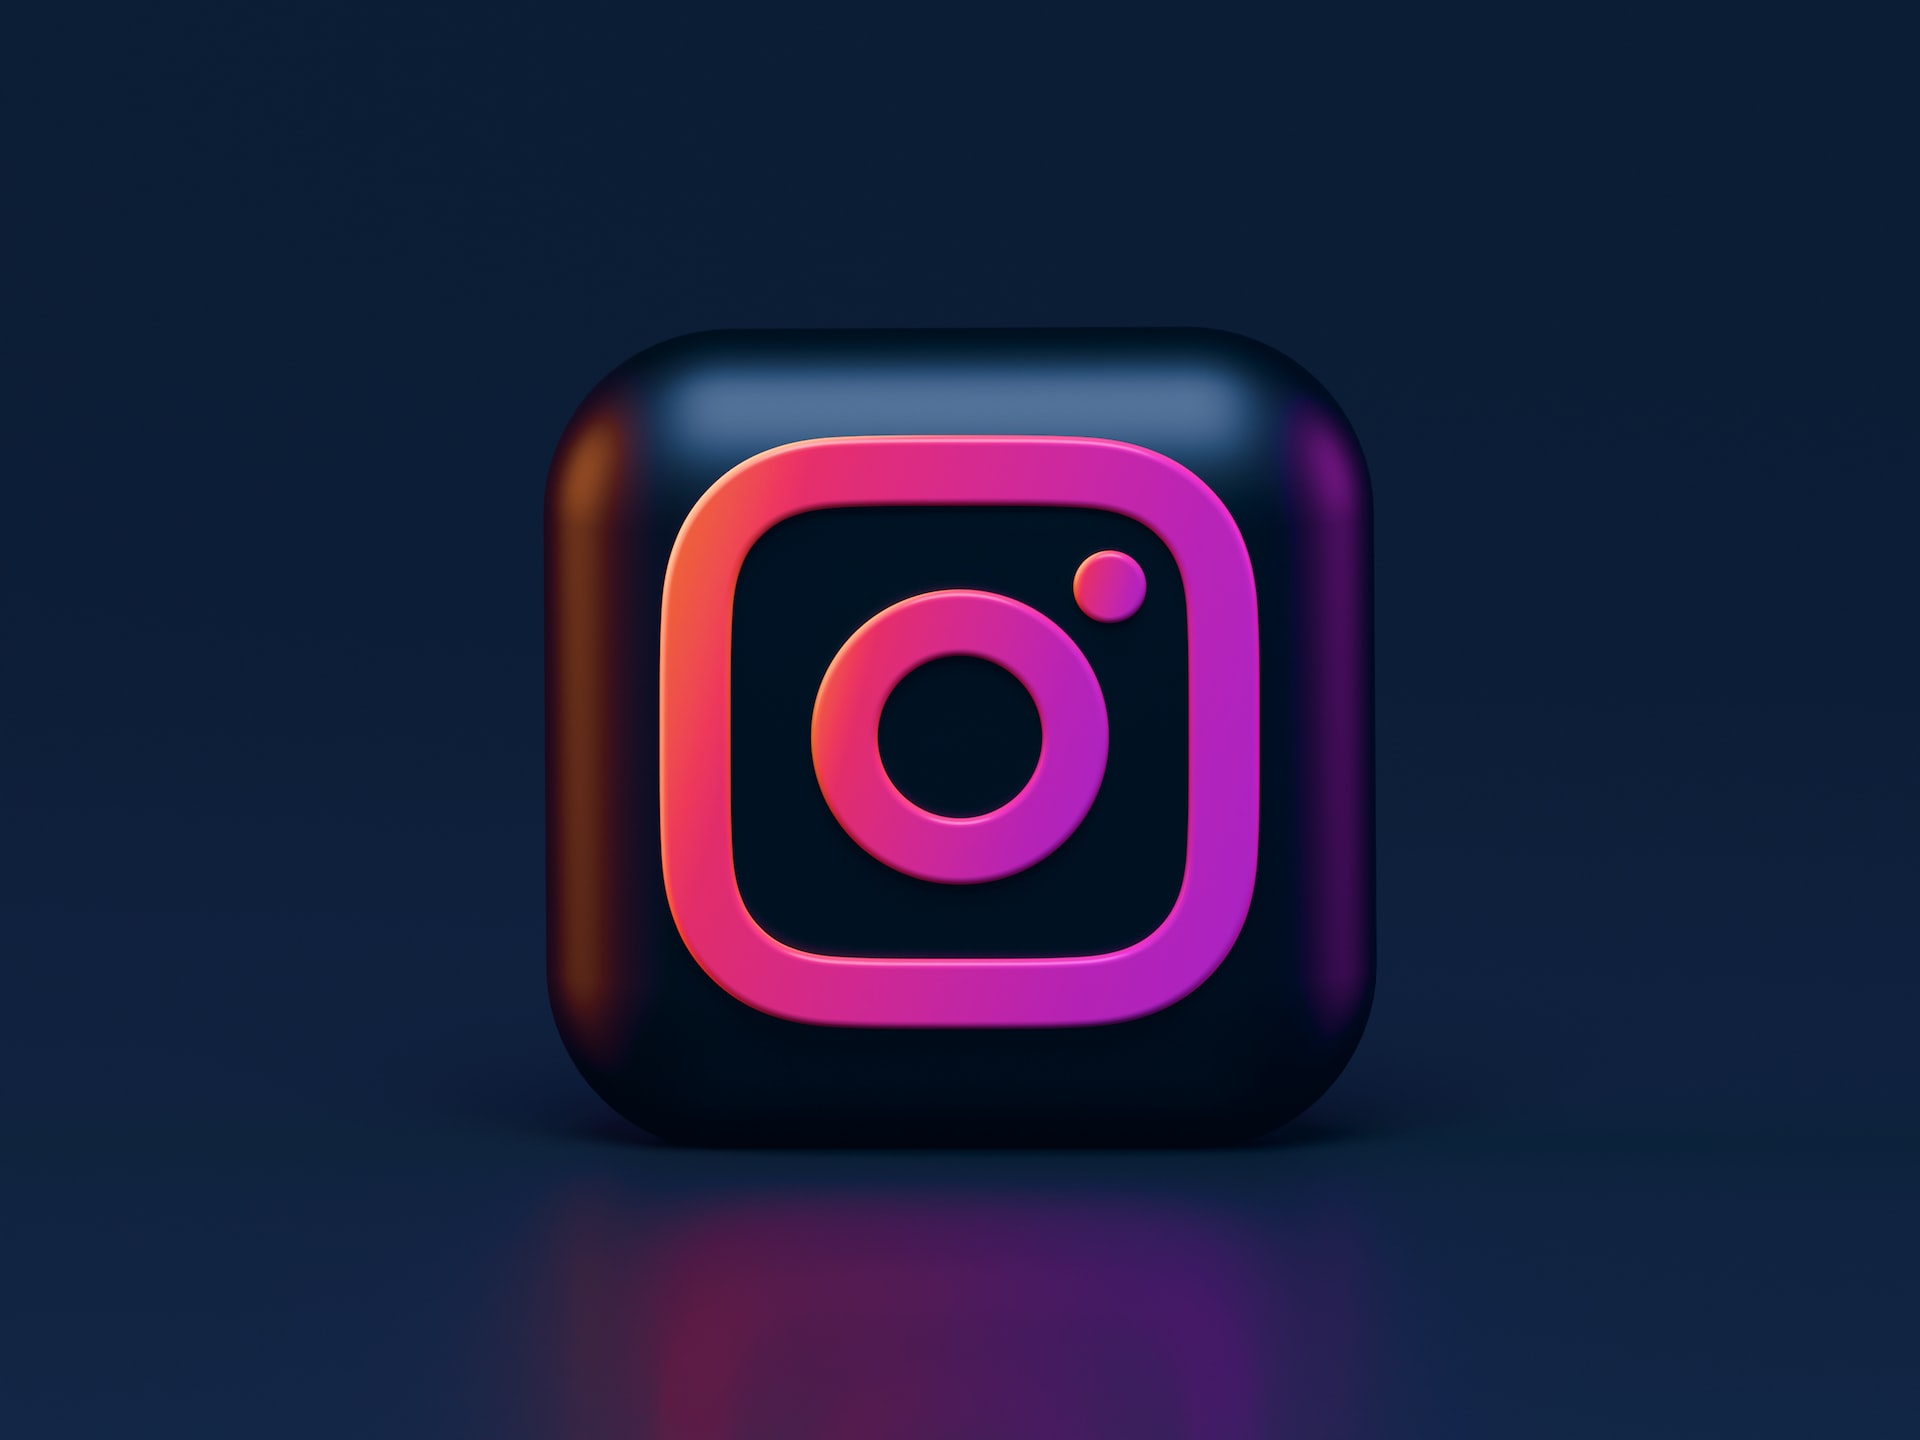 Digital rendering of Instagram logo and icon